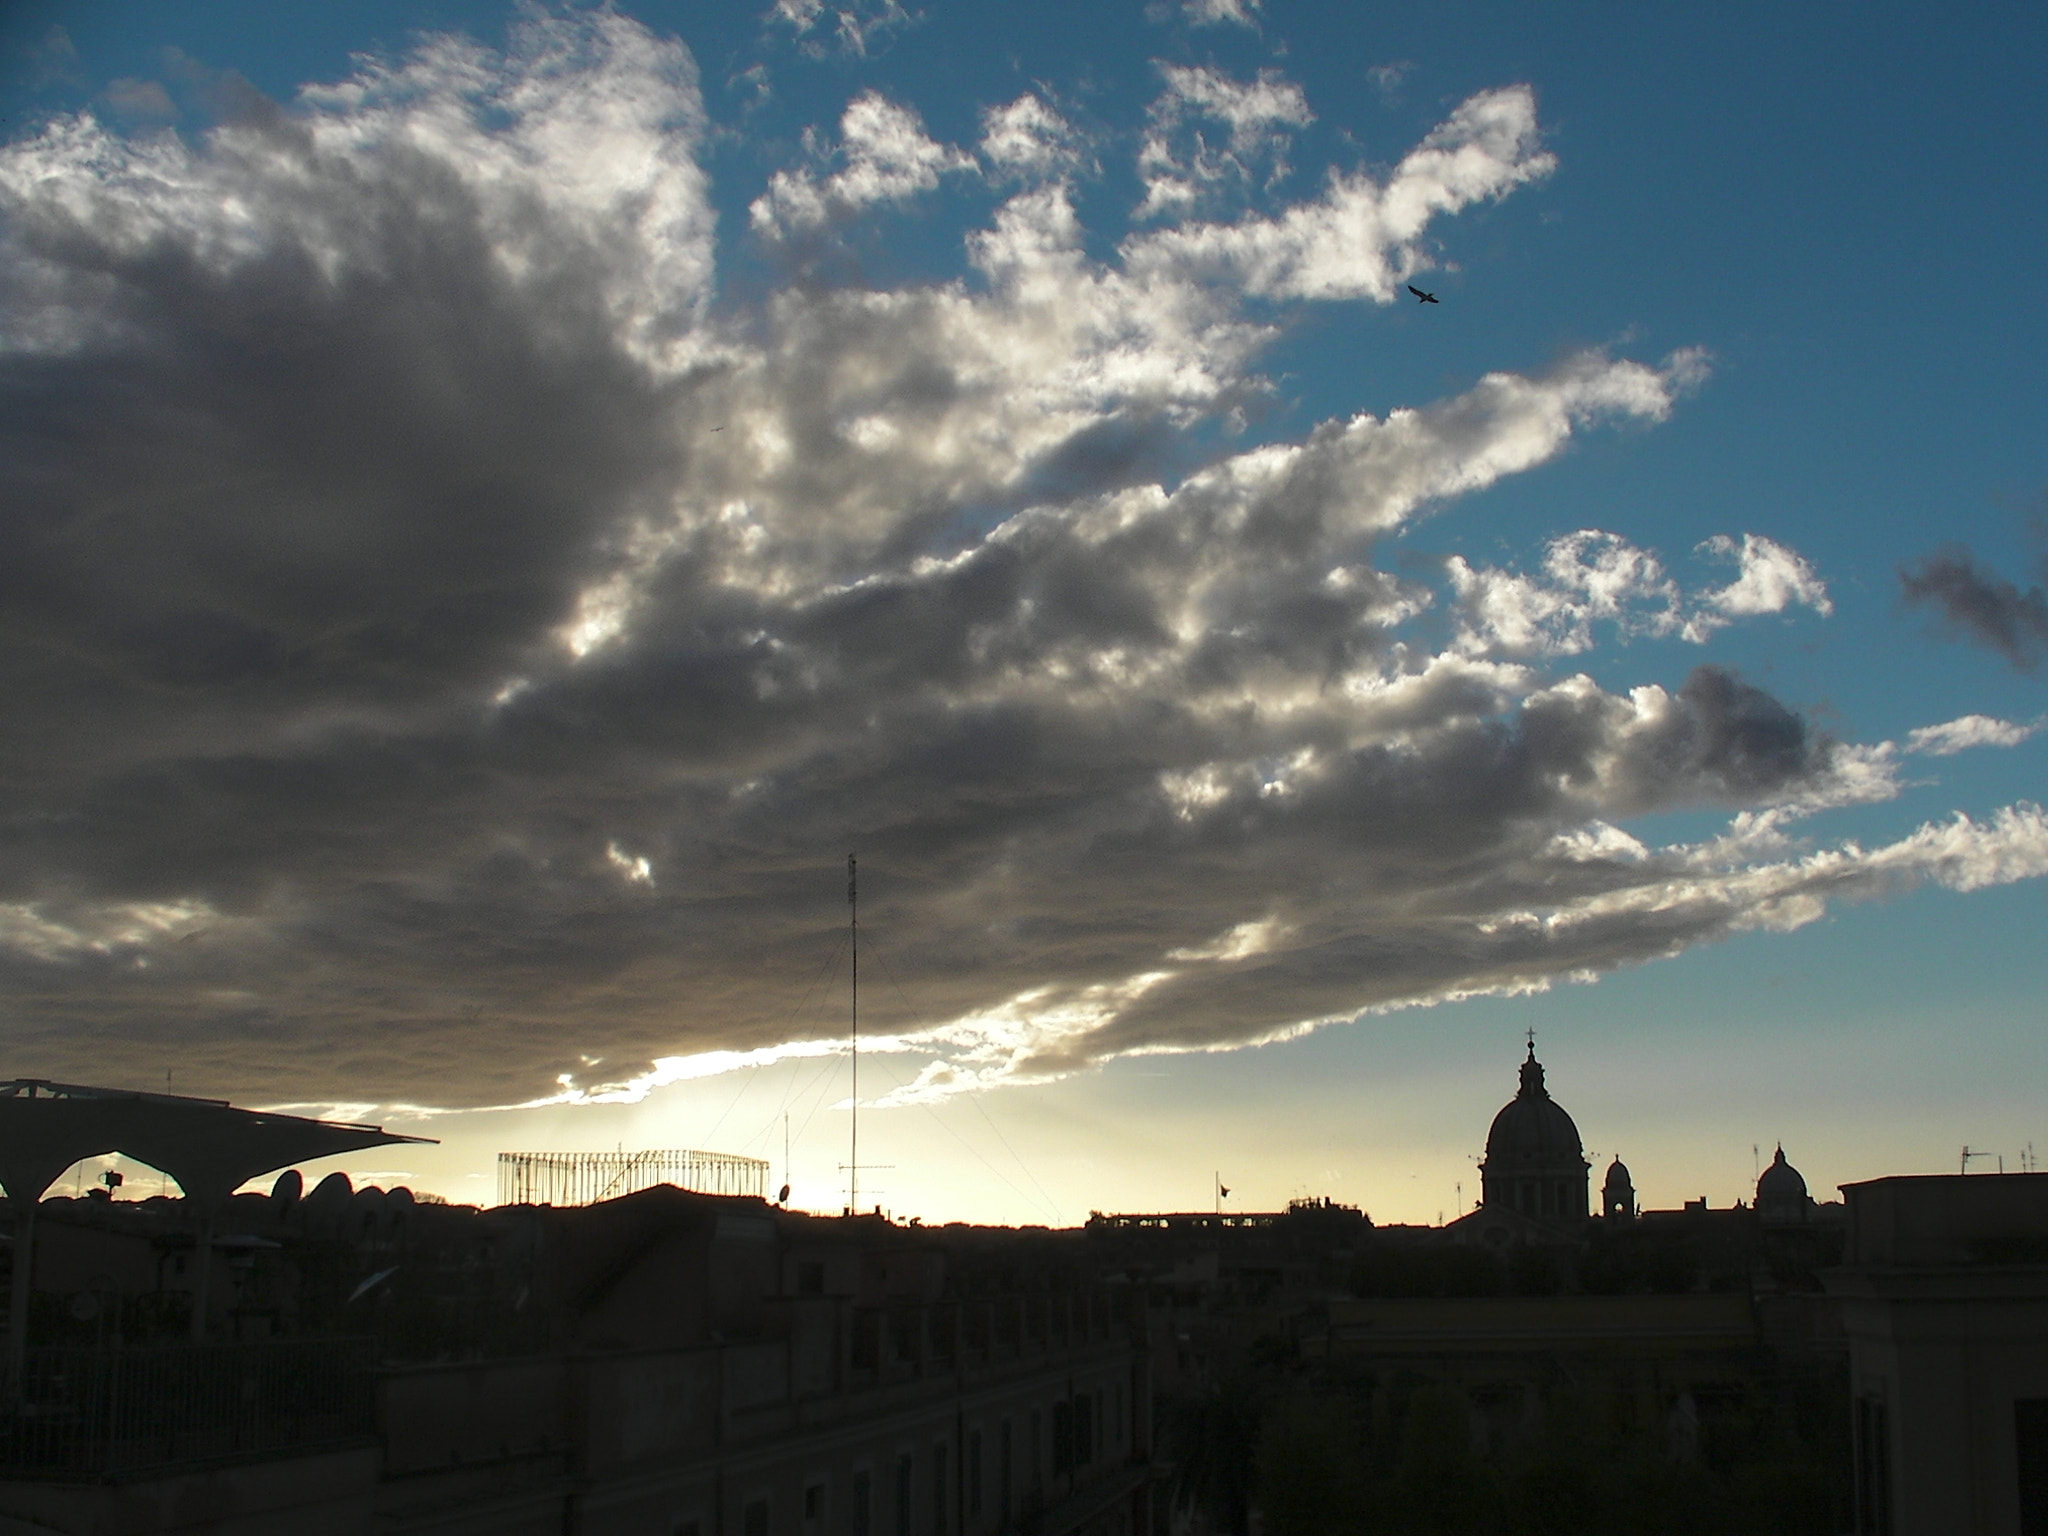 Samsung HMX20 sample photo. Lost in the "san pietro's" sky photography